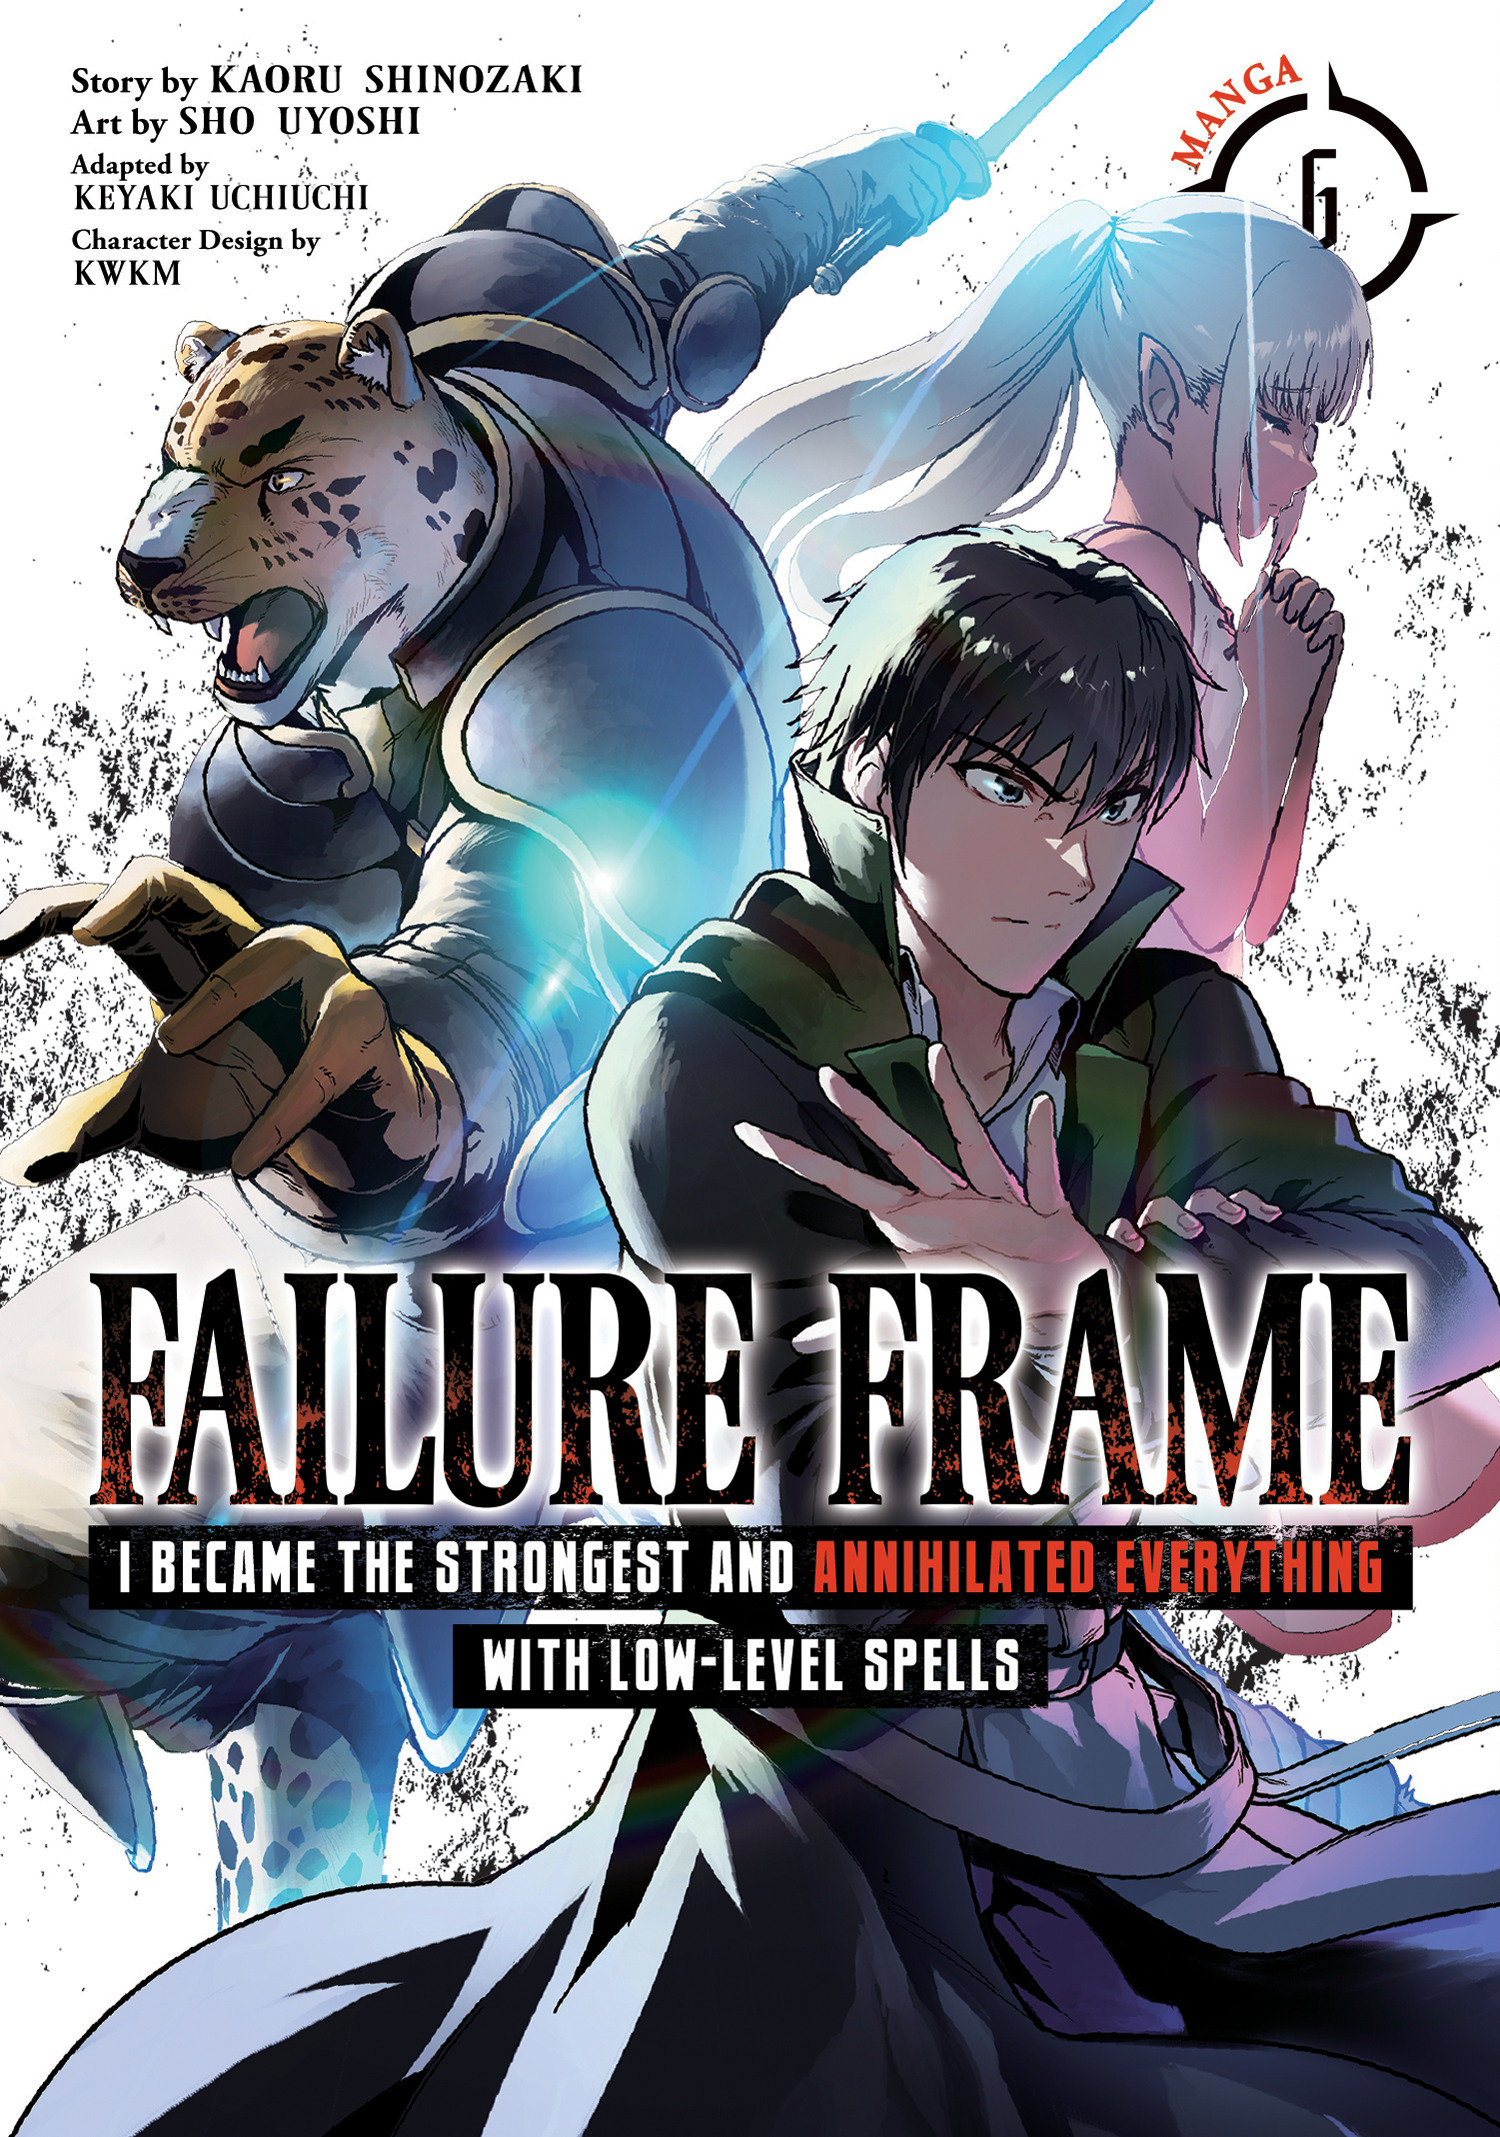 Failure Frame: I Became the Strongest and Annihilated Everything with Low-Level Spells Manga Volume 6